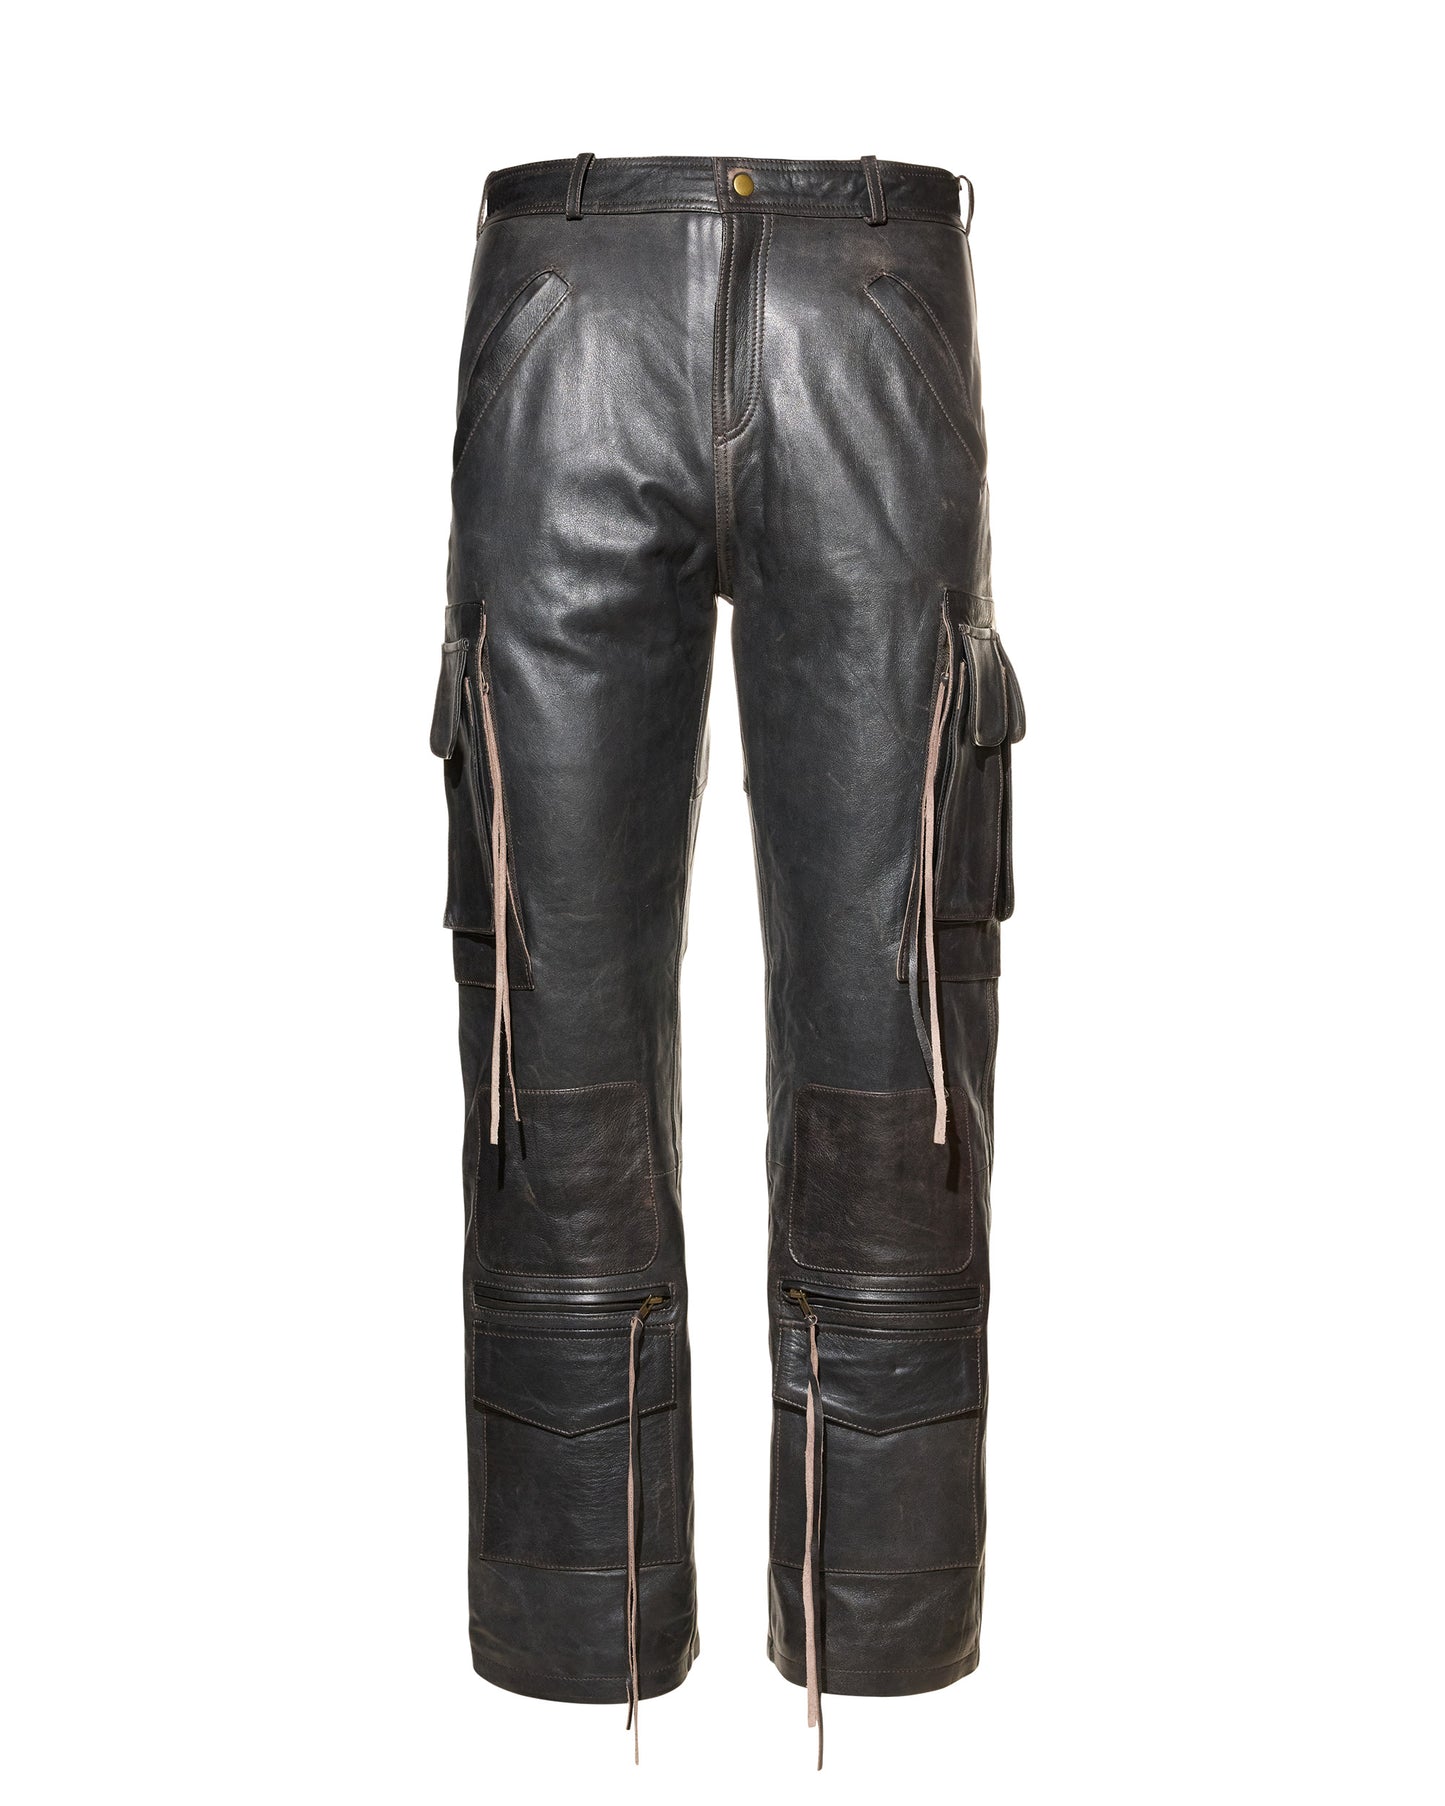 SOLDIER LEATHER TROUSERS